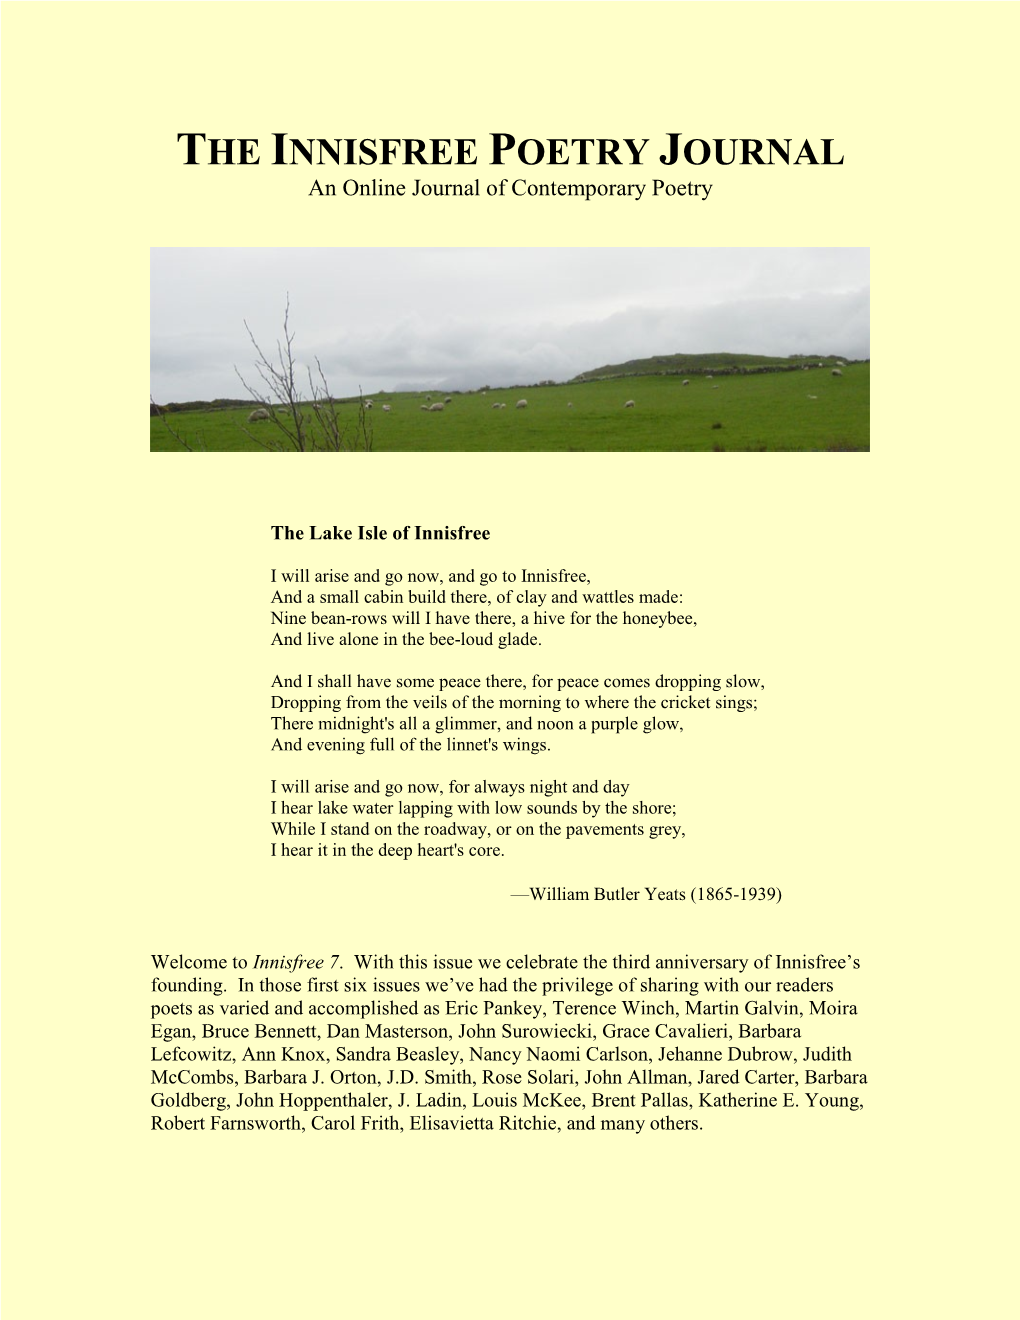 THE INNISFREE POETRY JOURNAL an Online Journal of Contemporary Poetry